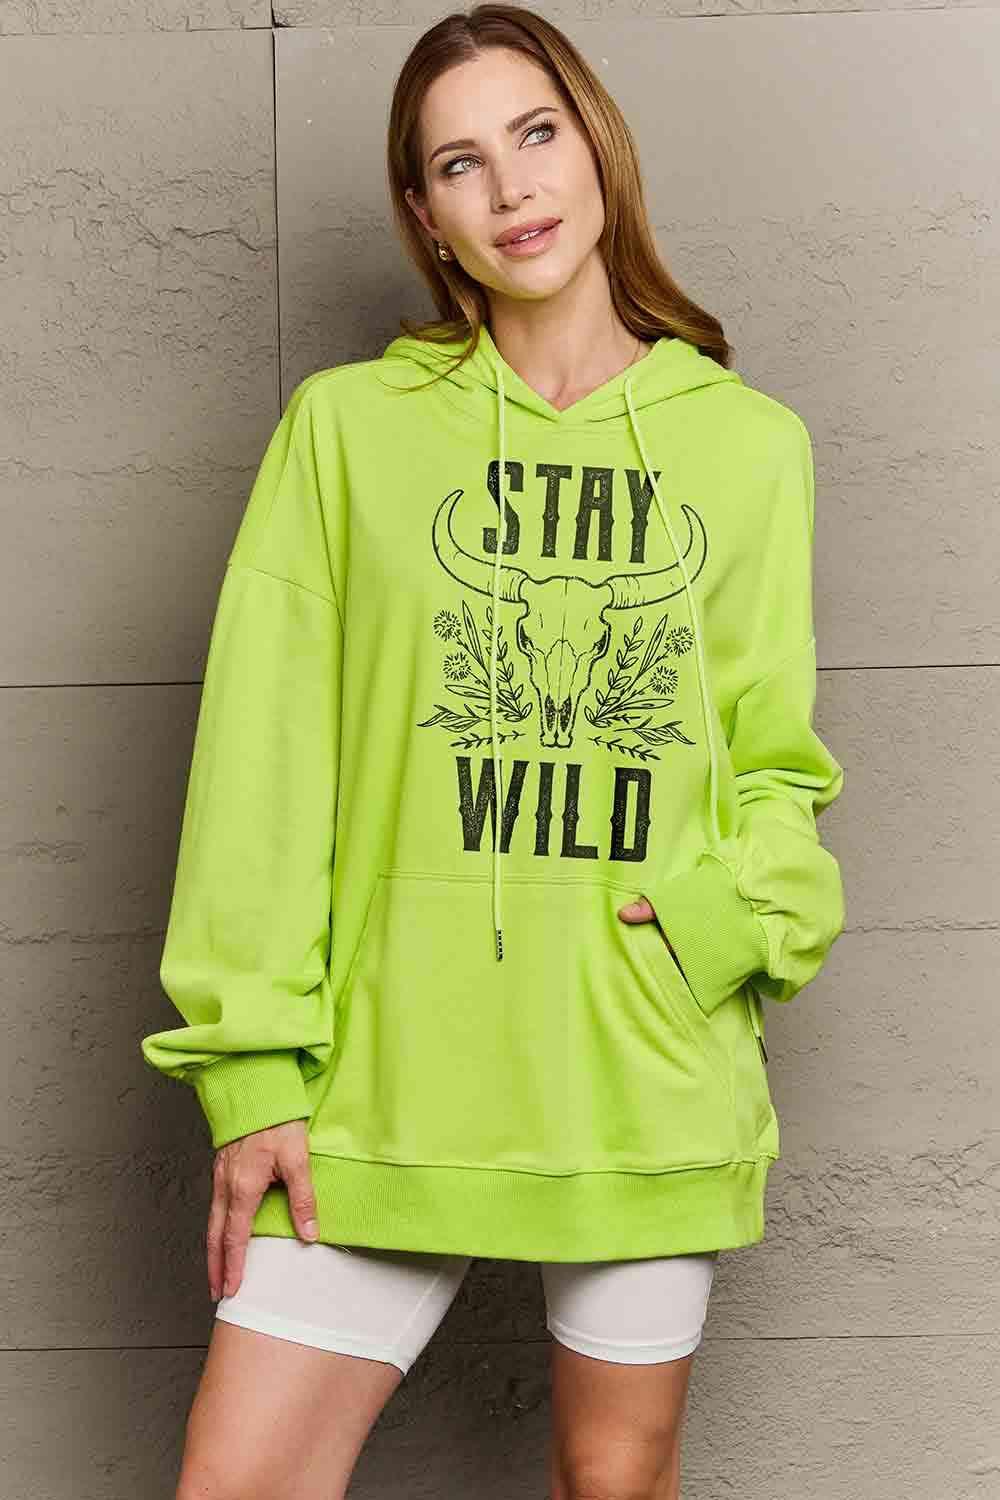 Simply Love Simply Love Full Size STAY WILD Graphic Hoodie - Immenzive